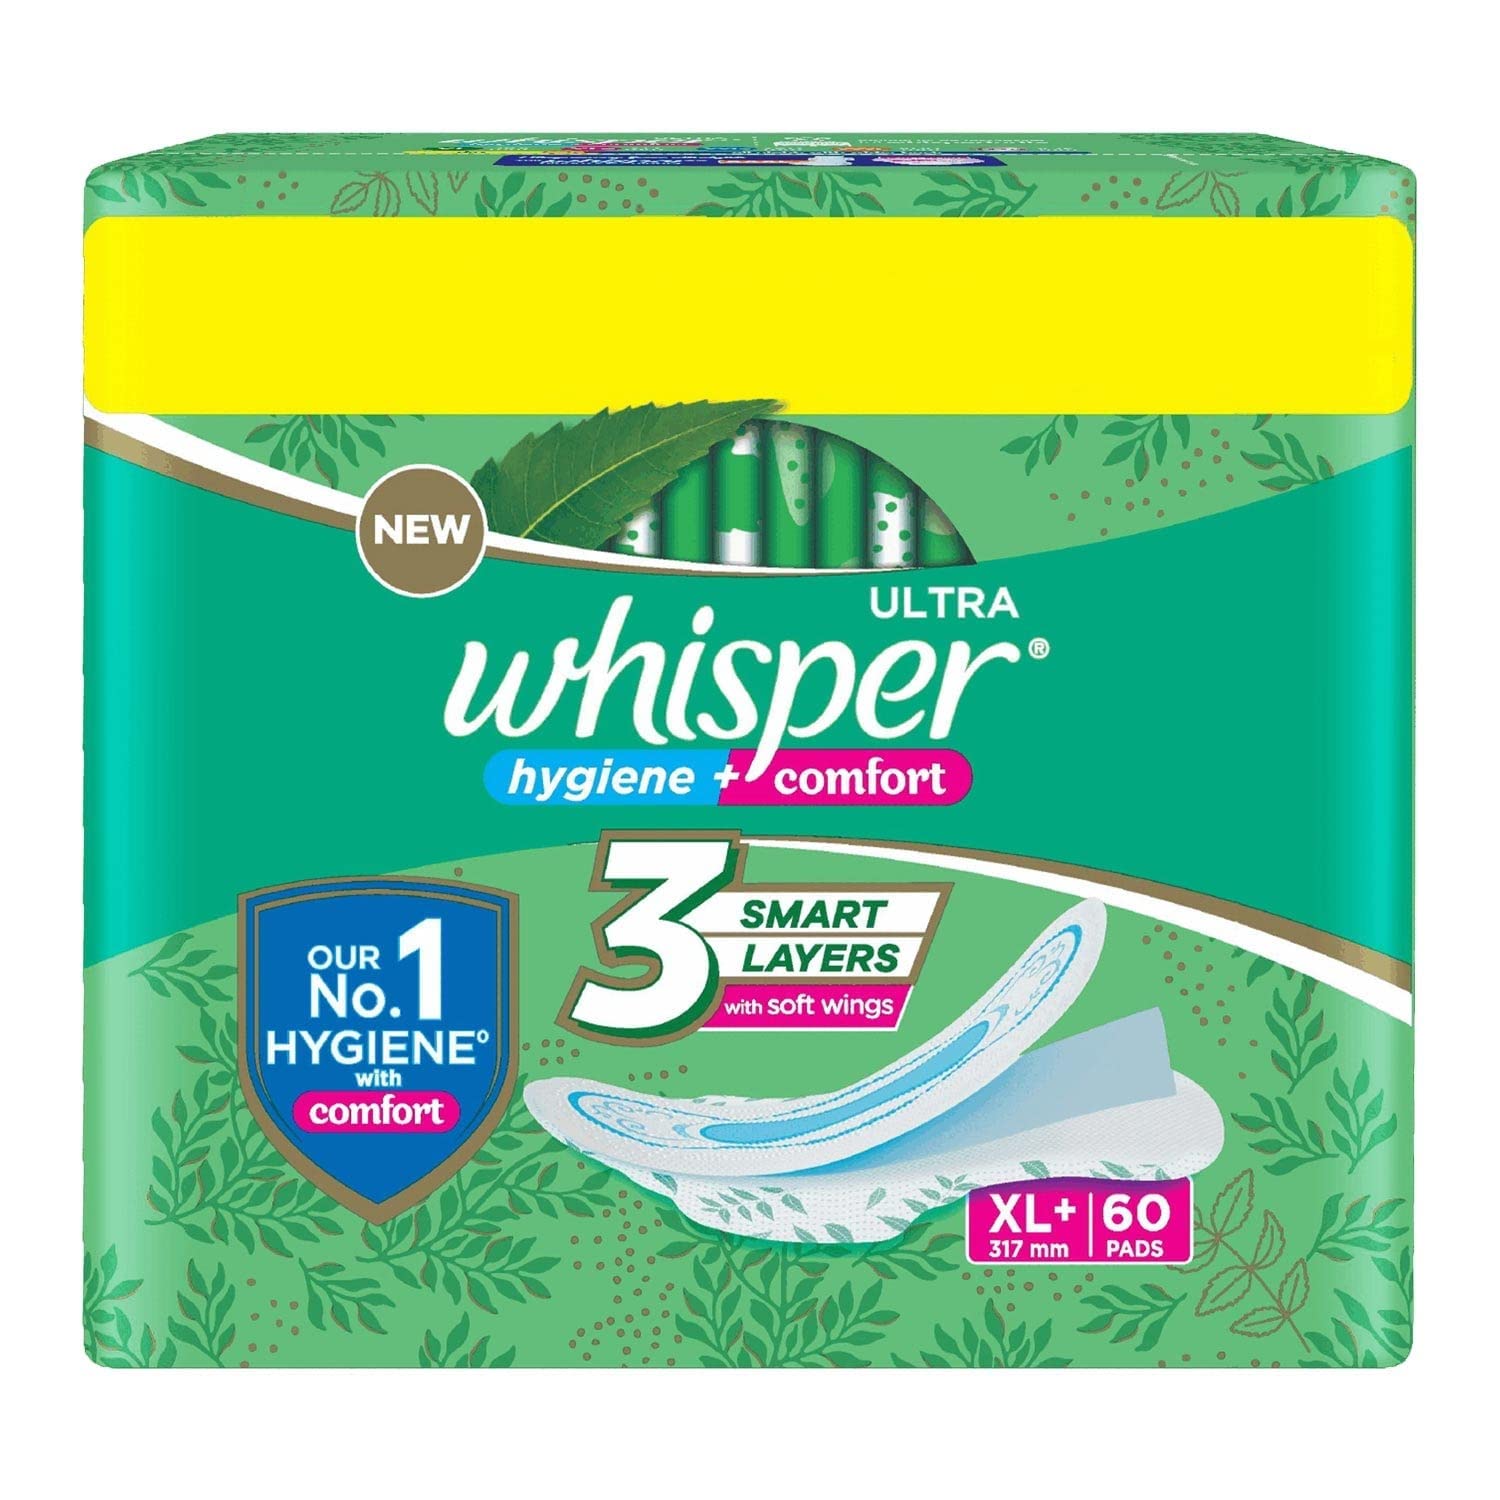 Whisper Ultra Clean Sanitary Pads for Women|60 thin Pads|XL+|Hygiene & Comfort|Soft Wings|Dry top sheet|Suitable for Heavy flow|Odour free|31.7 cm Long|With disposable wrap